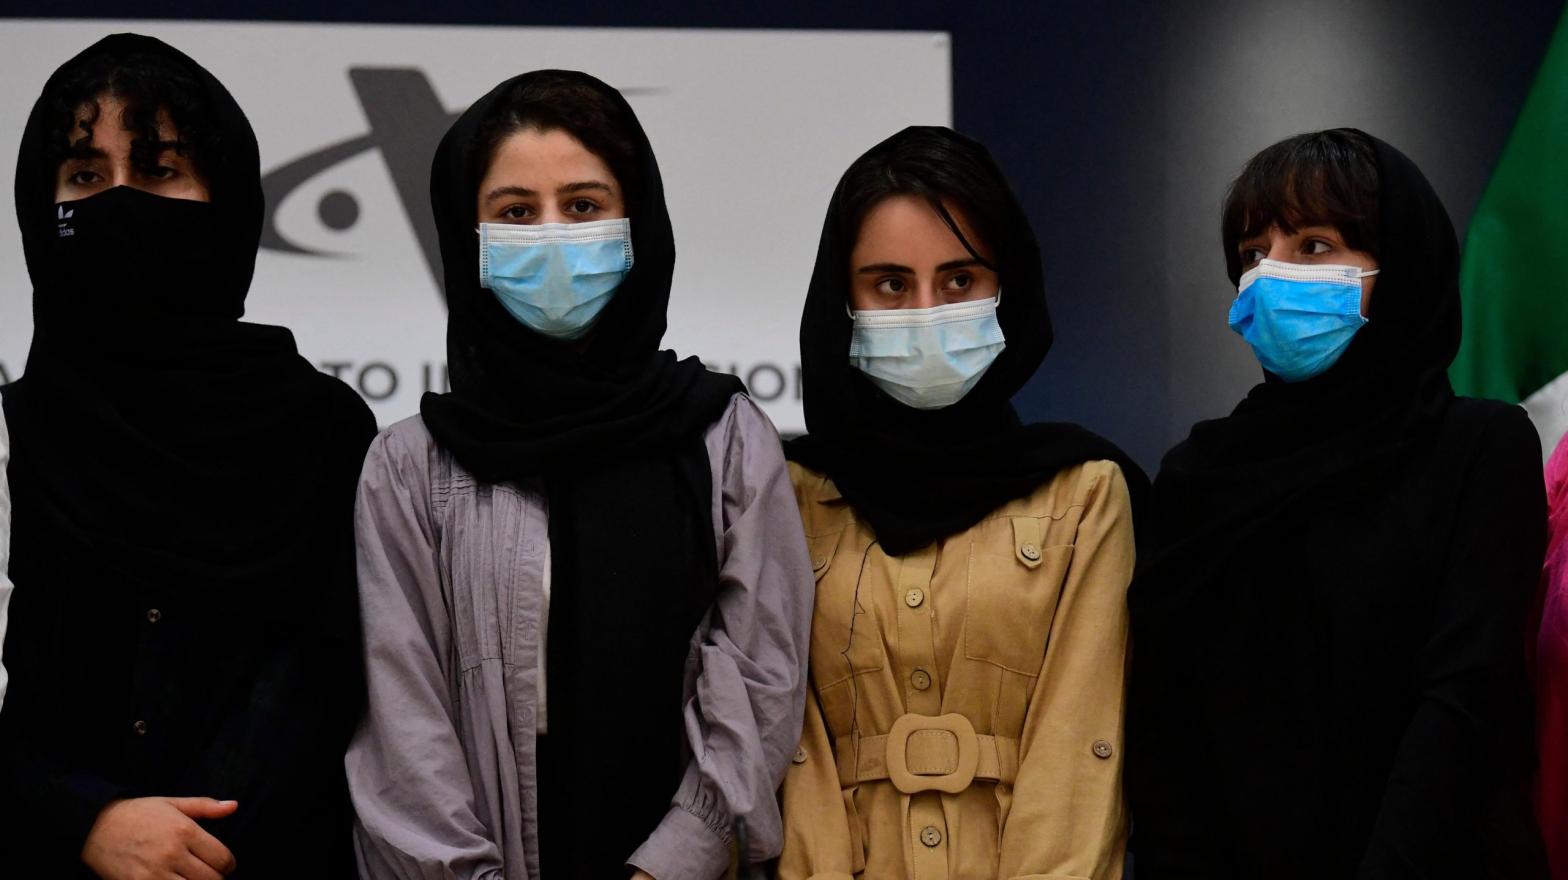 Four members of the Afghan Girls Robotics Team, as seen at Benito Juarez International Airport in Mexico City on Aug. 24, 2021, after receiving refugee status there. (Photo: Pedro Pardo / AFP, Getty Images)